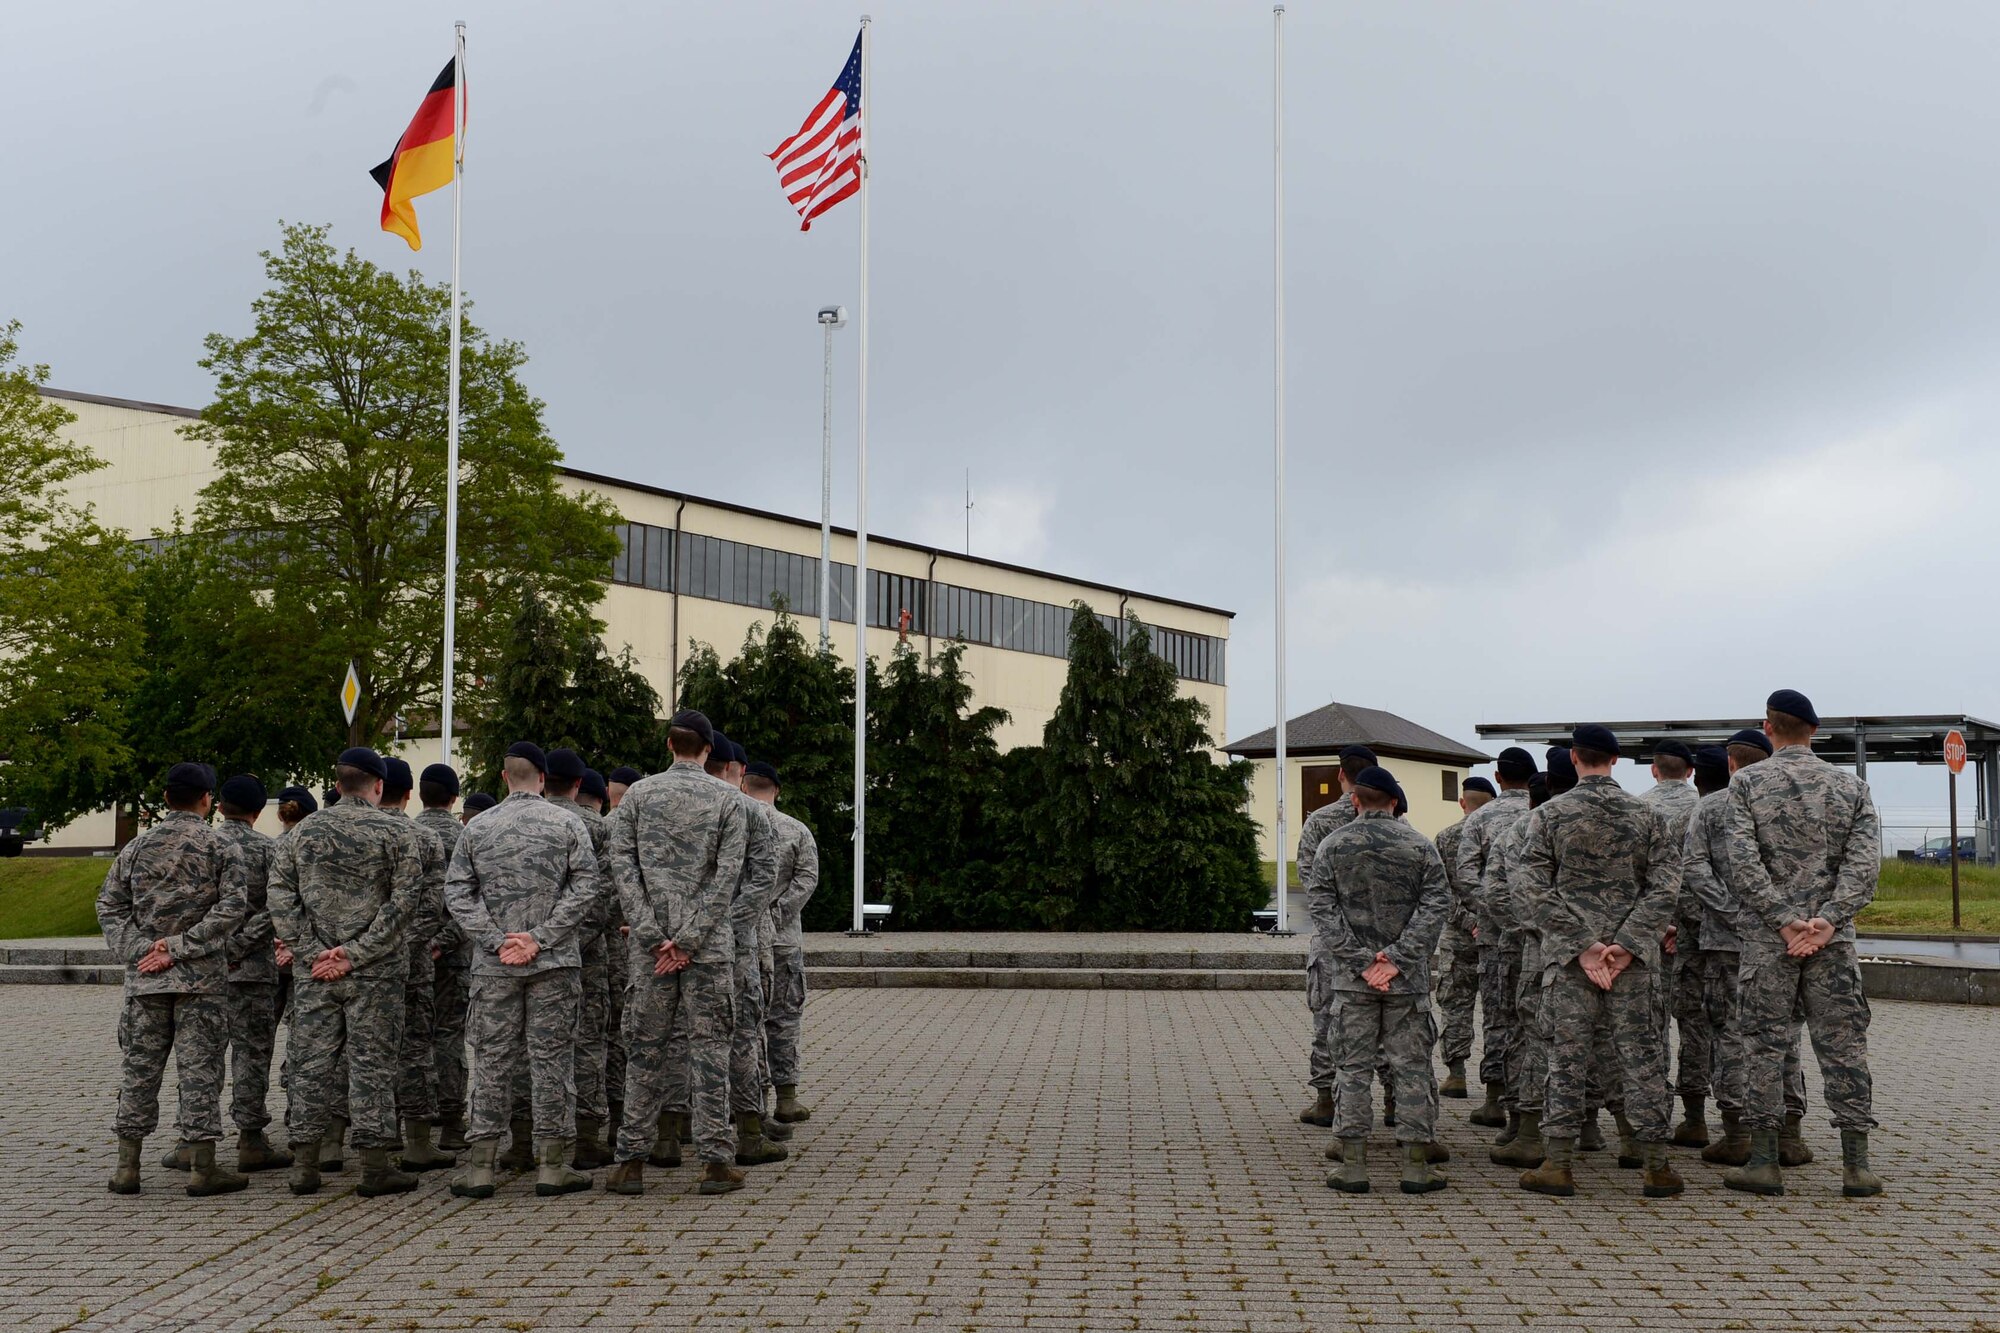 U.S. Air Force Airmen stand at parade rest during a National Police Week retreat ceremony at Spangdahlem Air Base, Germany, May 12, 2014. National Police Week is held in remembrance of fallen police officers and security forces members. (U.S. Air Force photo by Airman 1st Class Kyle Gese/Released)